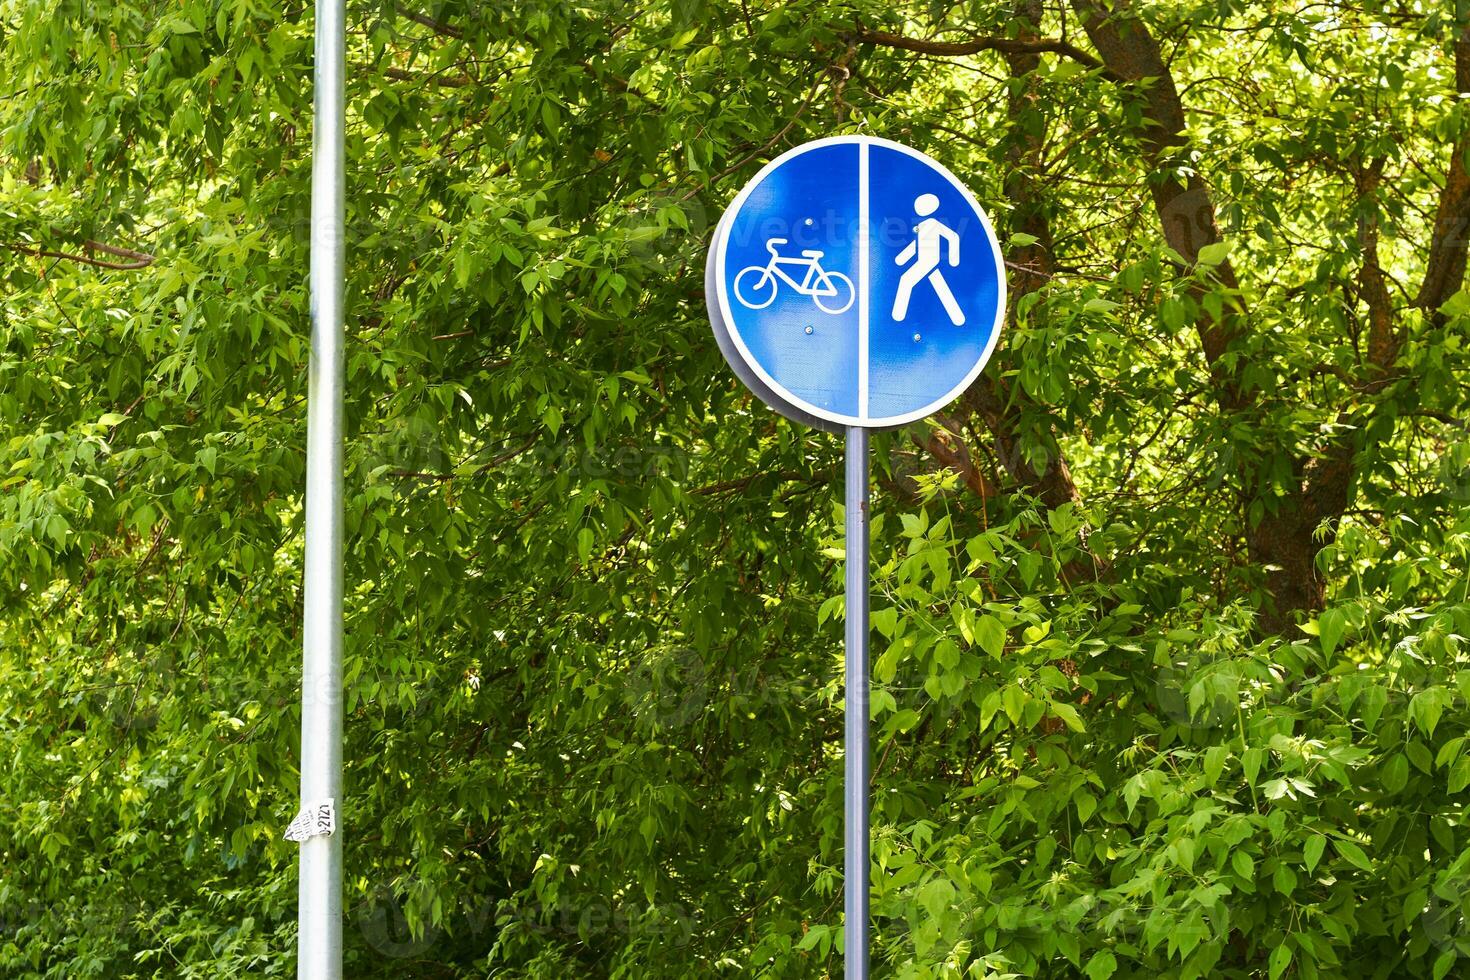 Photo round blue pedestrian and bicycle sign